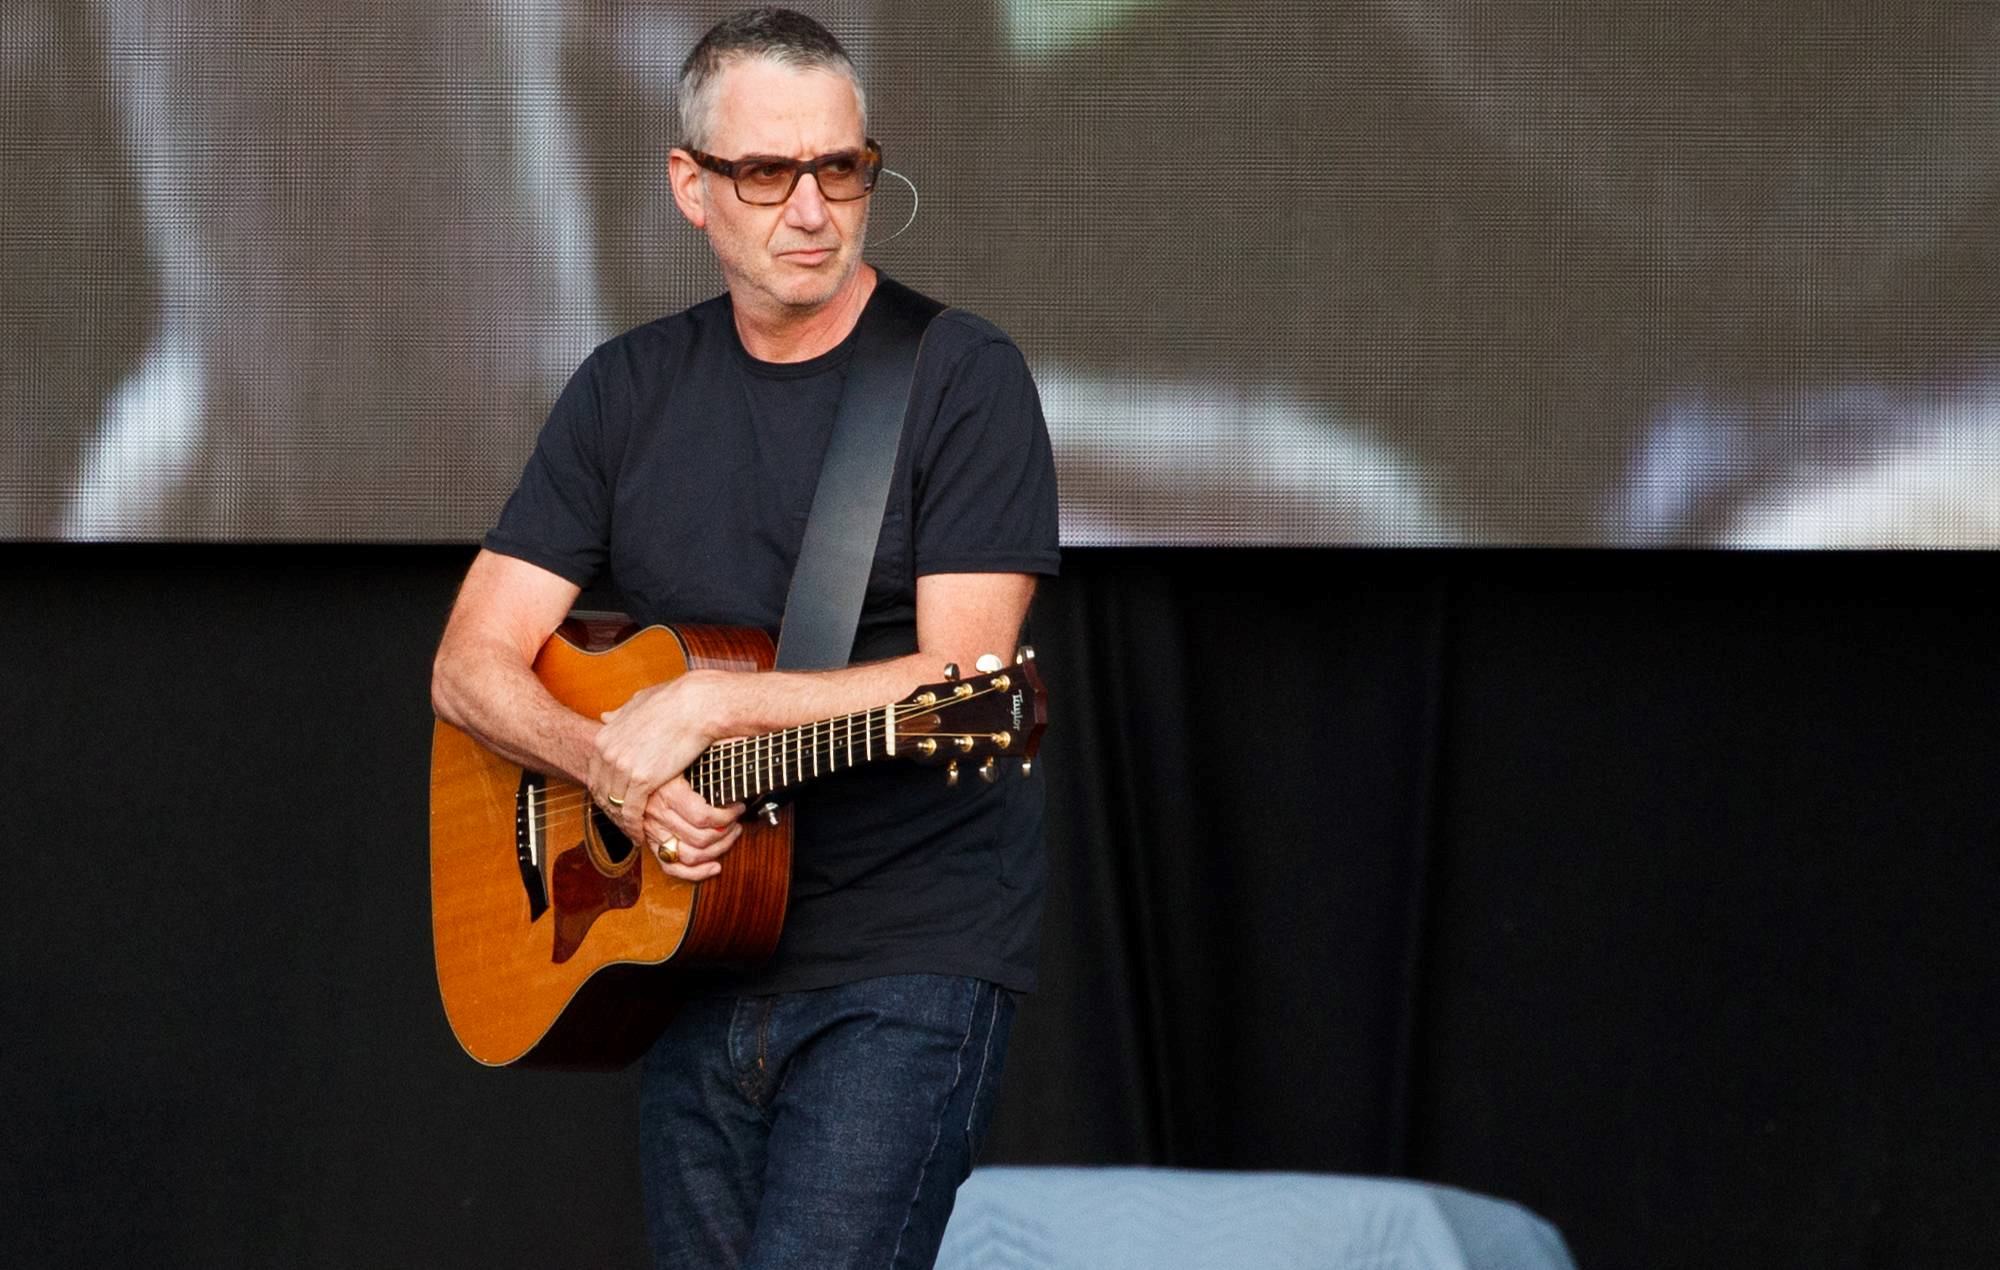 17 Enigmatic Facts About Stone Gossard - Facts.net